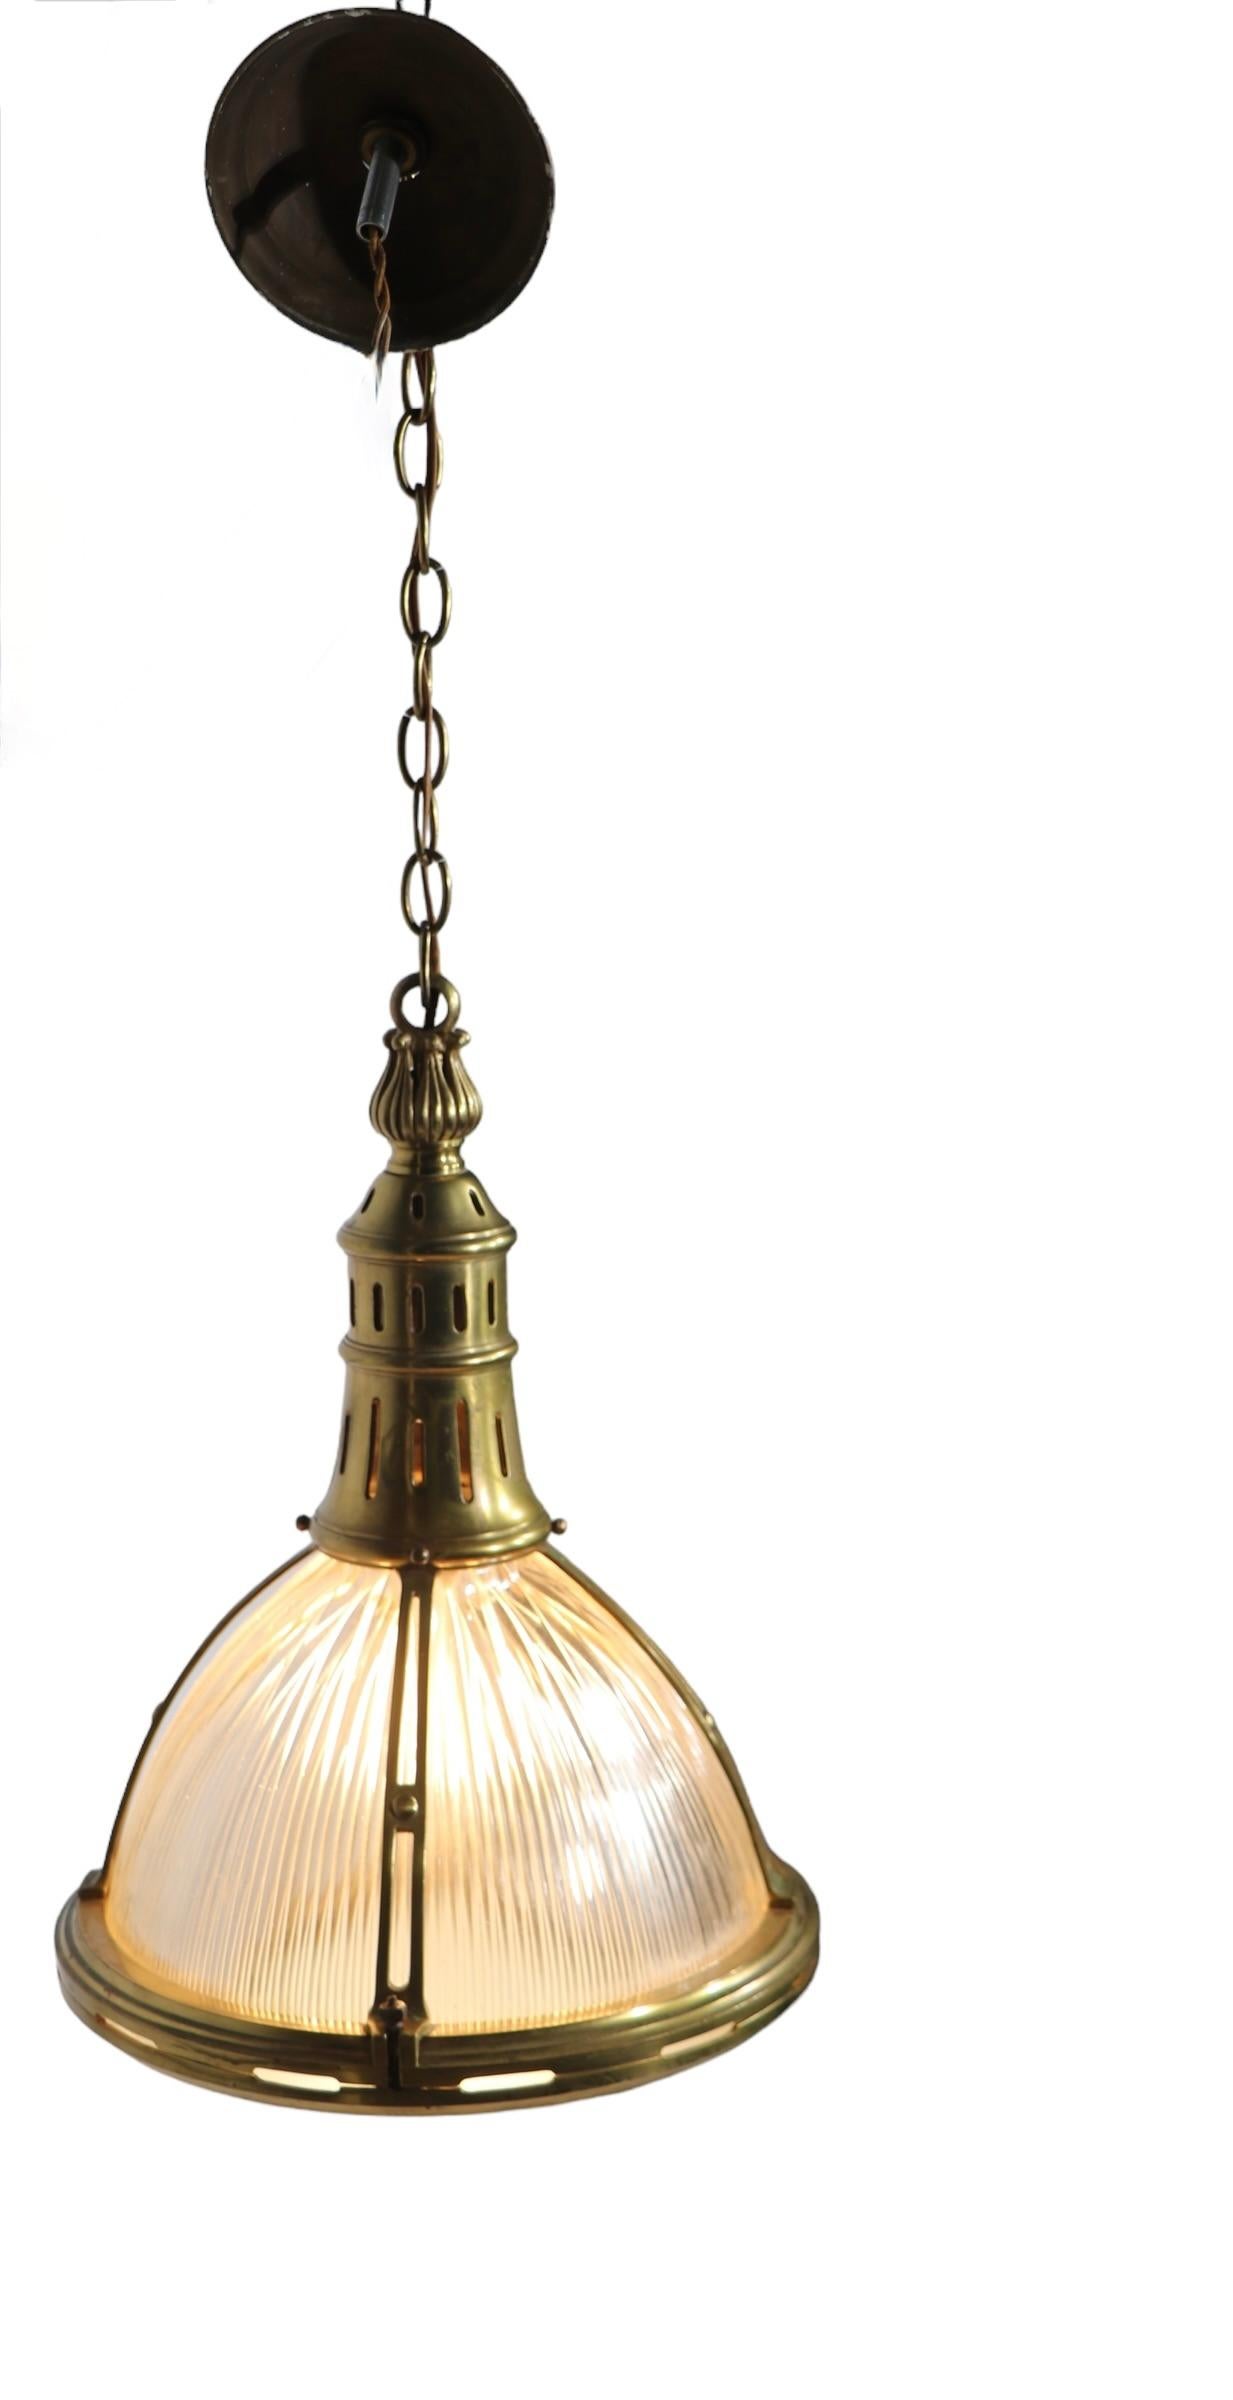 Decorative Antique Halophane Pendant Chandelier with Brass Hardware In Good Condition For Sale In New York, NY